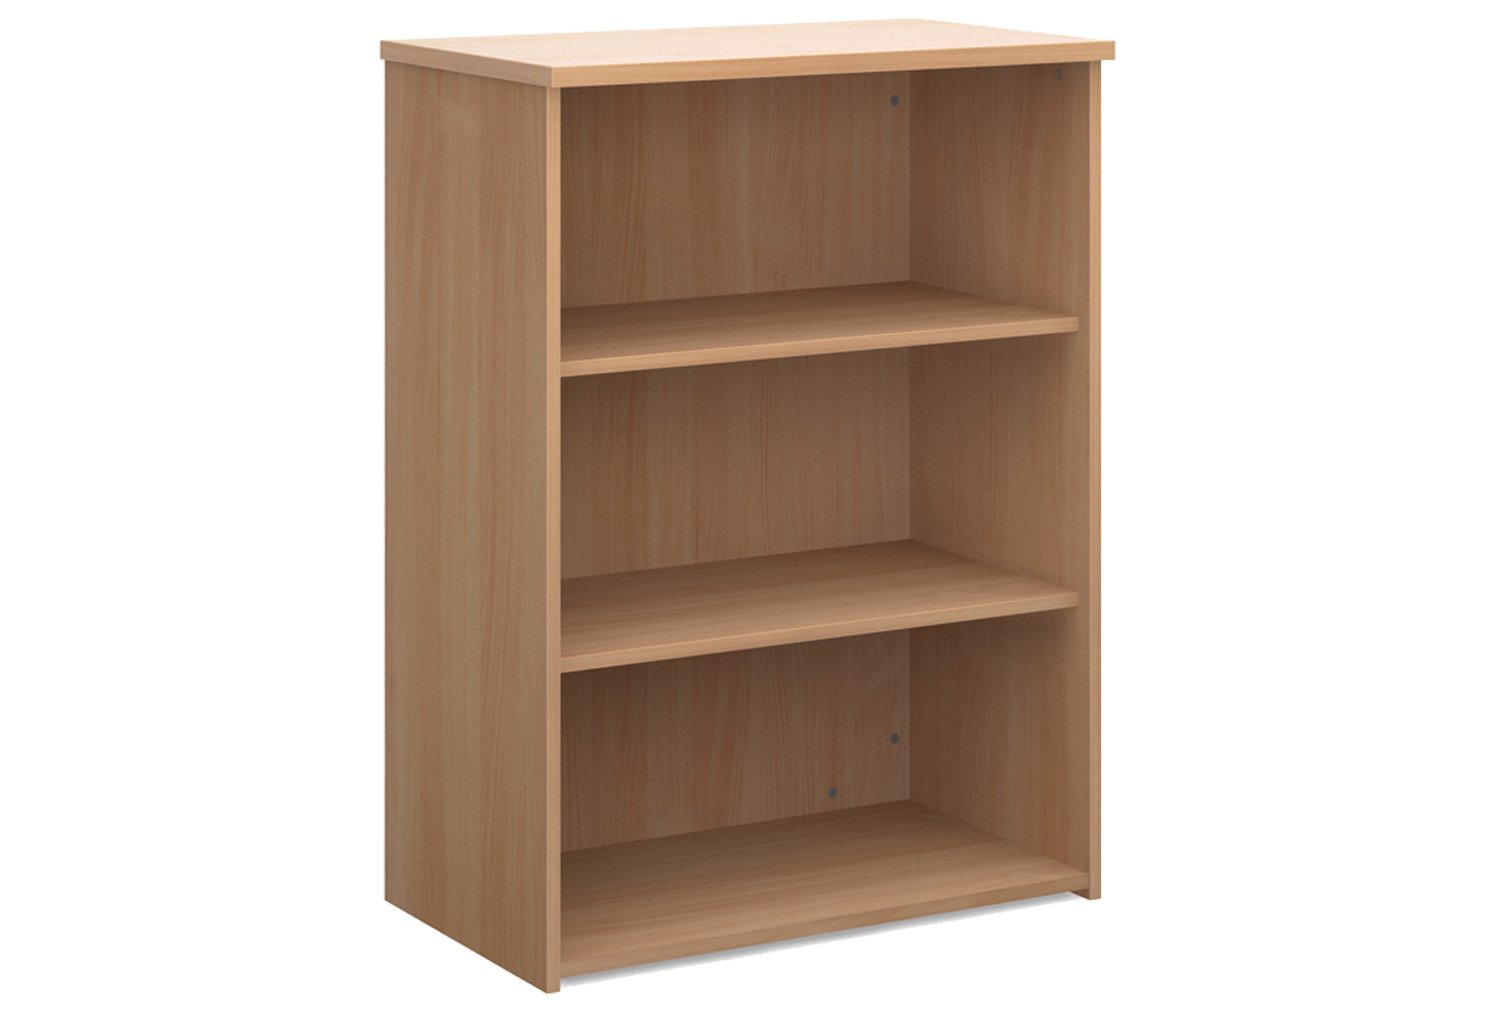 Tully Bookcases